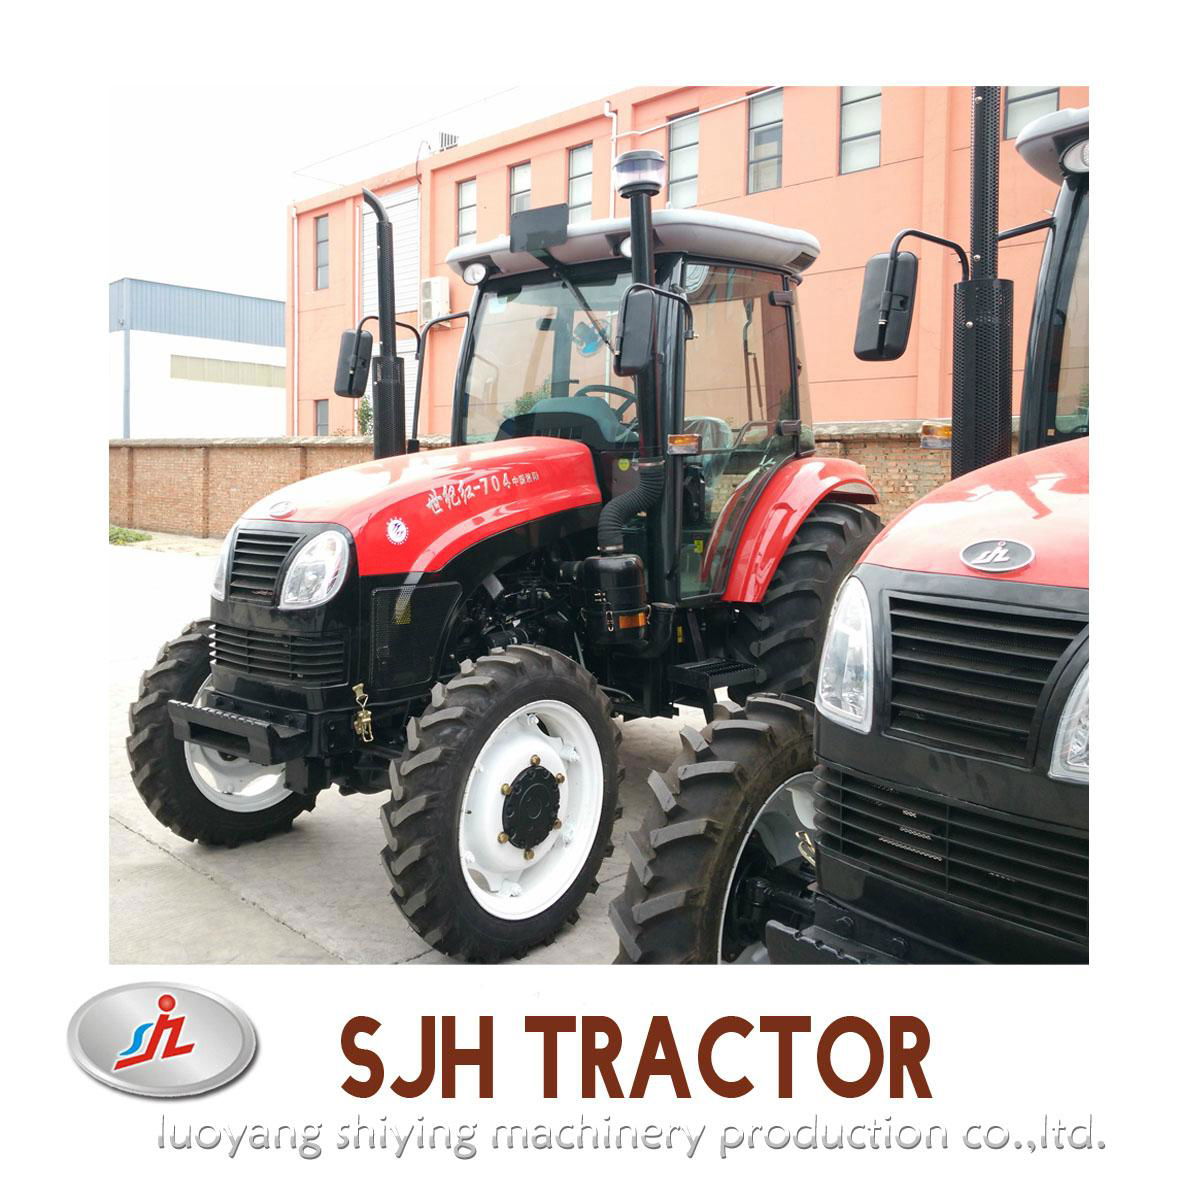 High Quality 70hp 4wd Farm Tractor Made in China 2